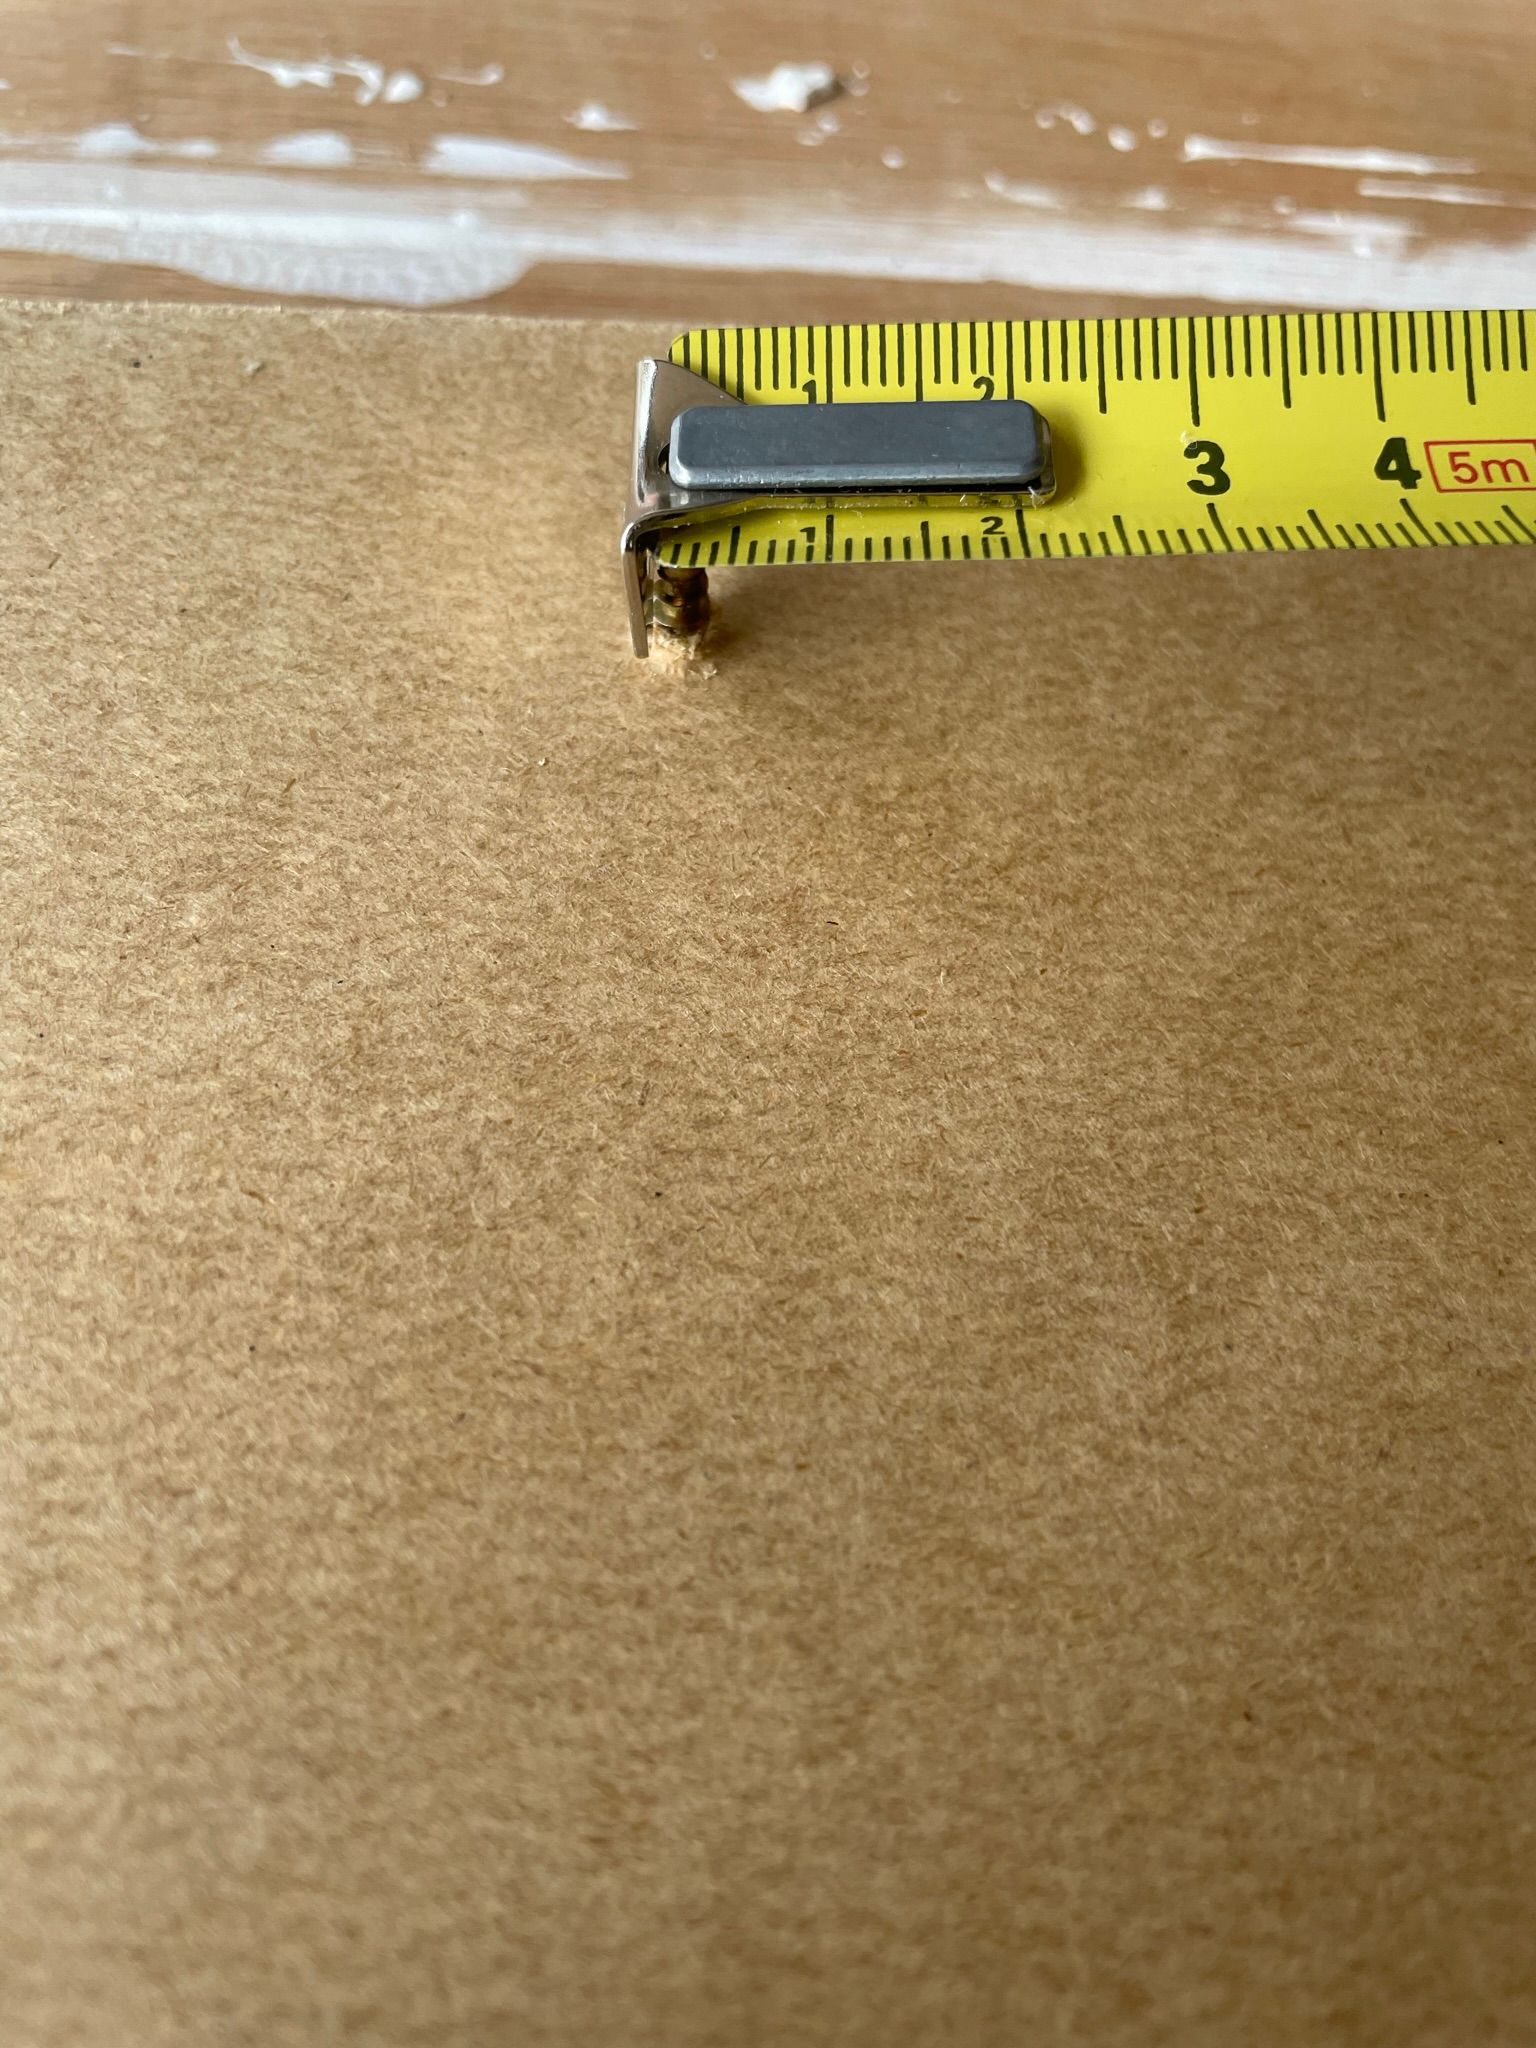 Tape measure hooked onto a screw